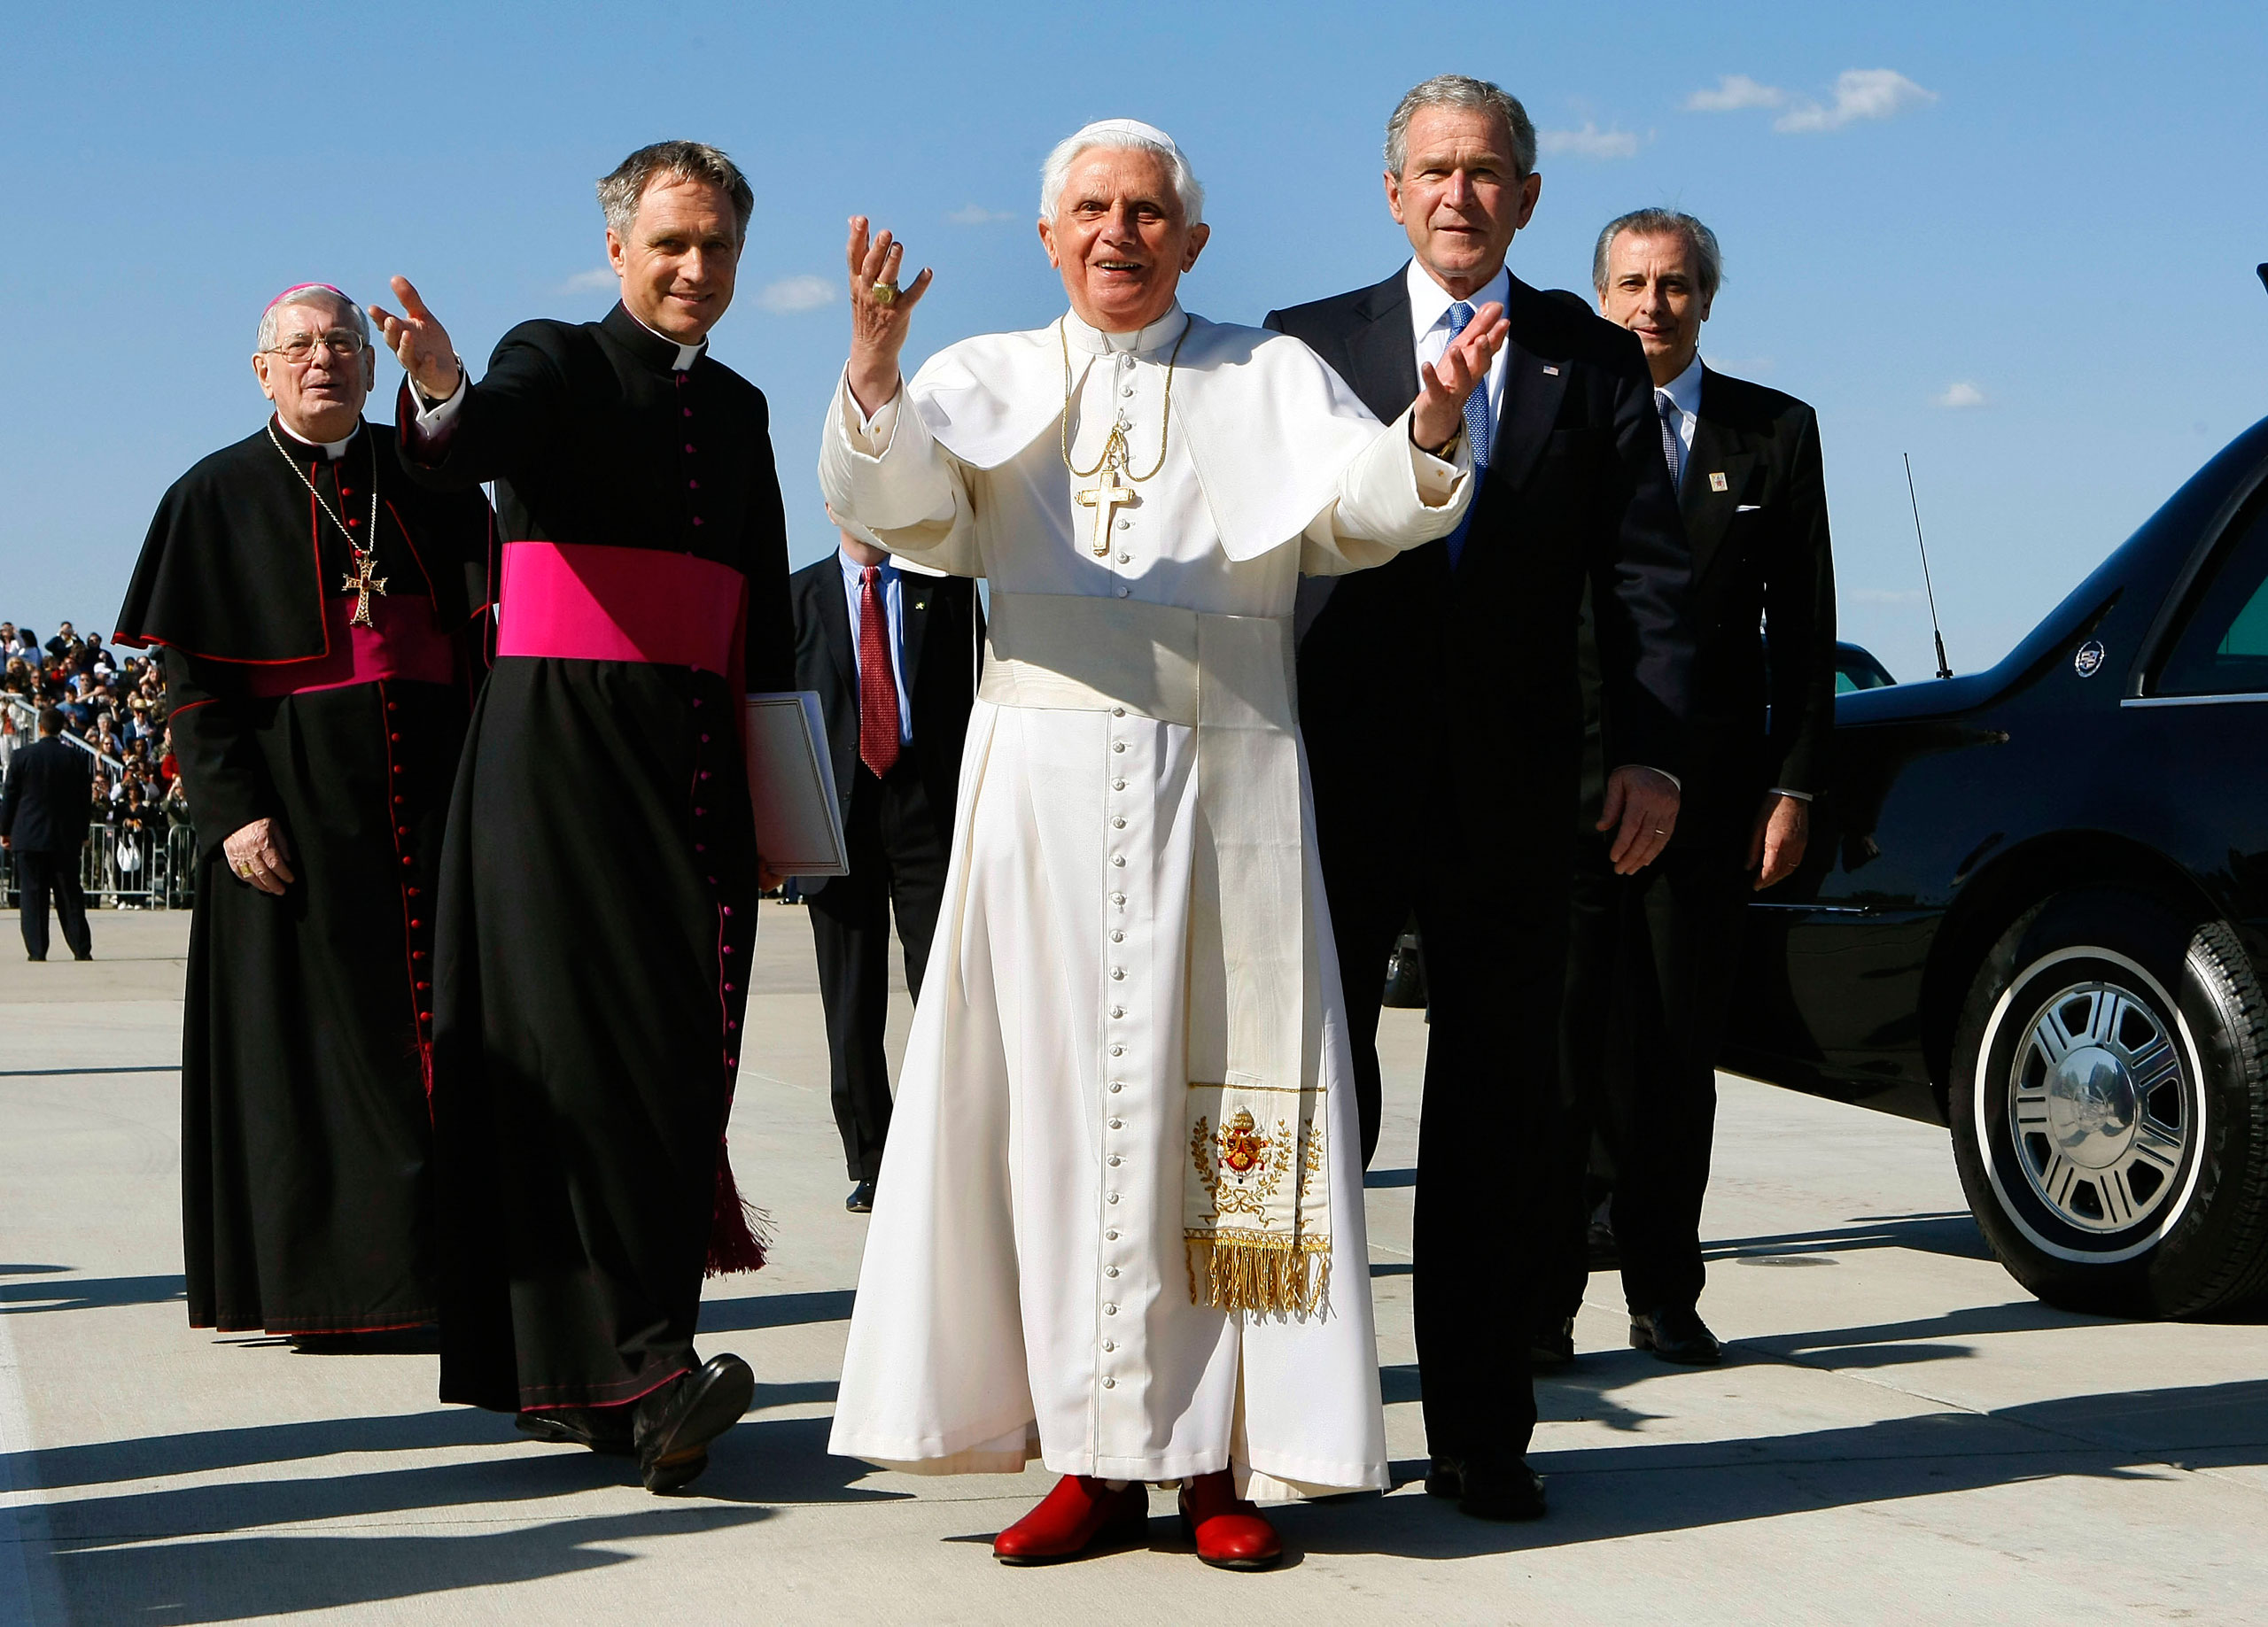 Pope Benedict XVI  reacts to the cheering crowd as he stands with George W. Bush upon his arrival at Andrews Air Force Base, April 15, 2008 in Camp Springs, Md.